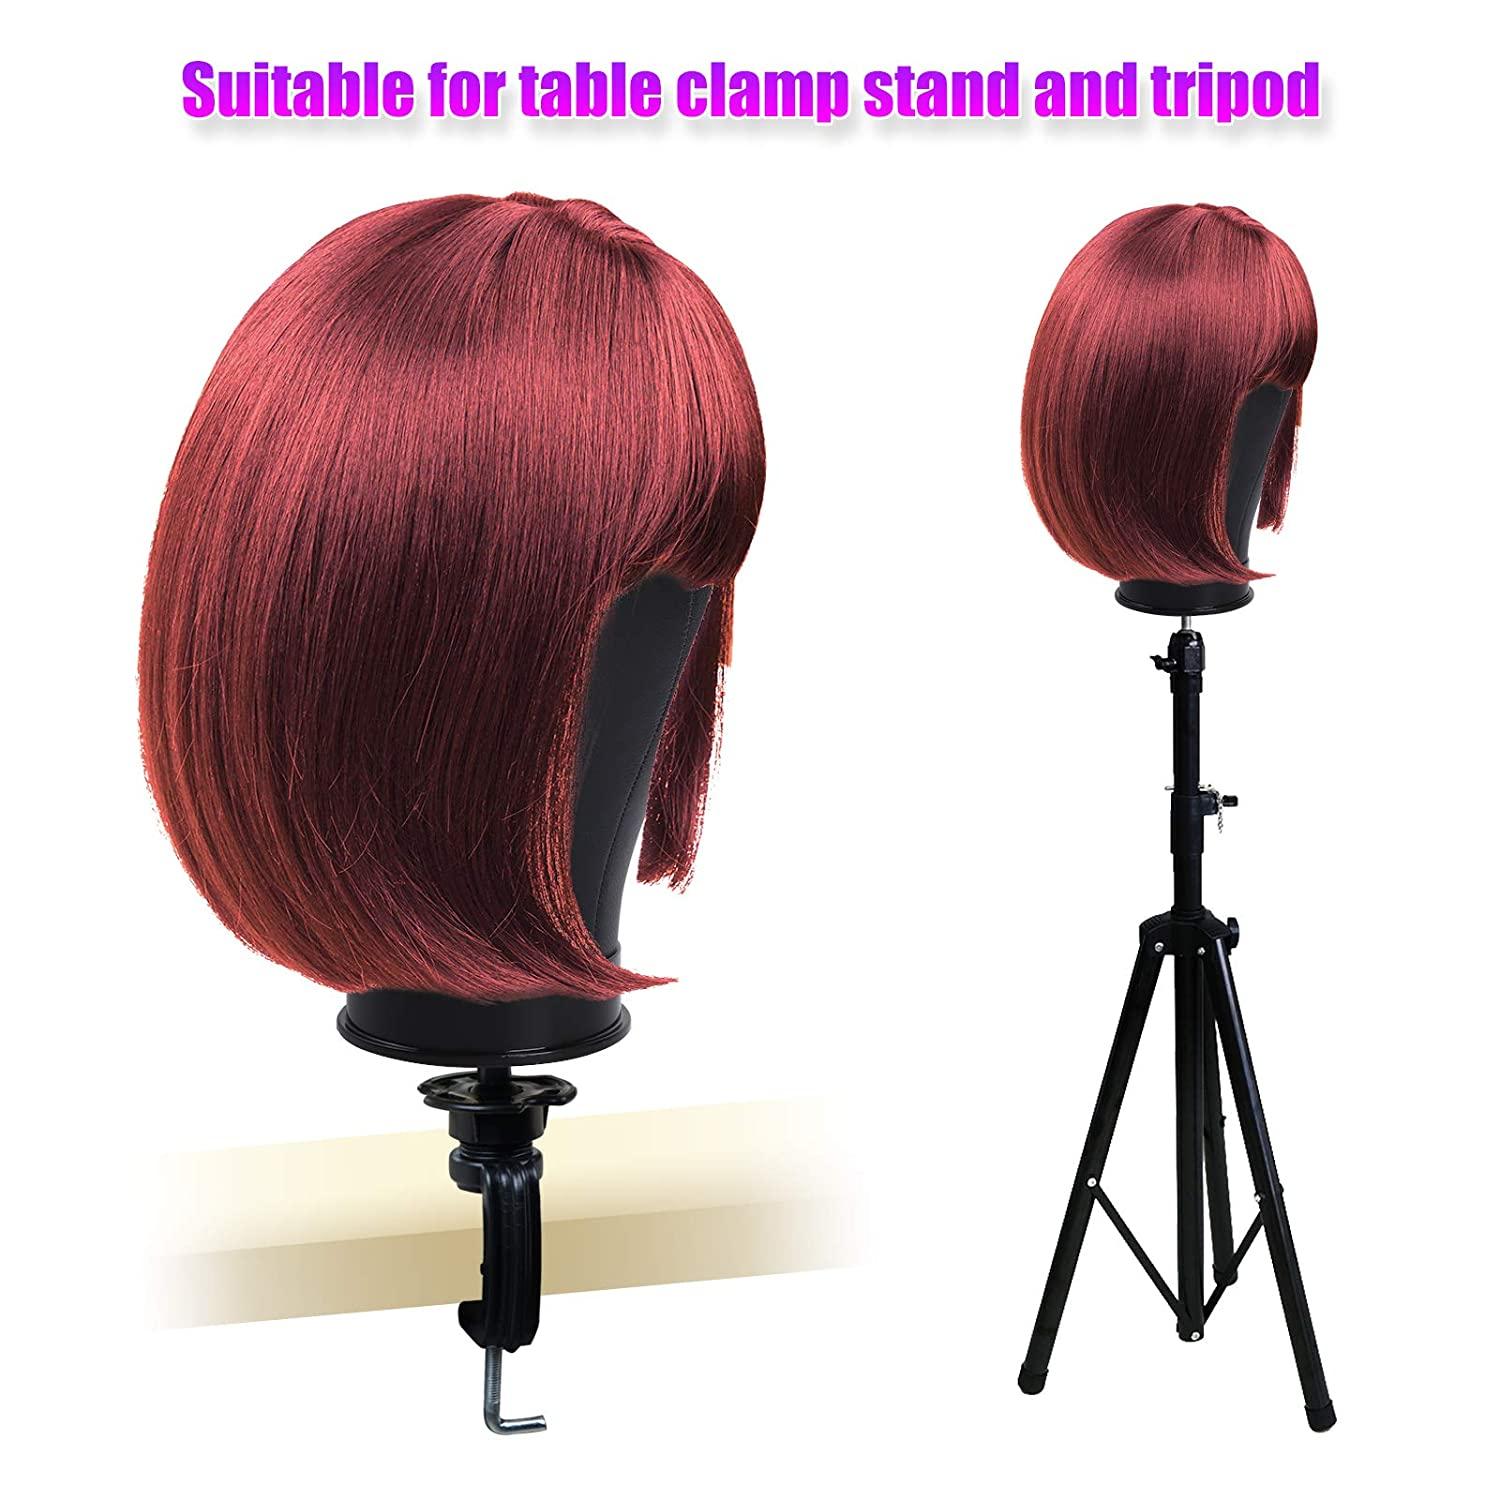  UPerfe Wig Head Stand With Mannequin Head for Styling Display  Making Kit 22 inch Black Maniquins Canvas Block Head for Wigs (Canvas Wig  Head With Tripod Stand, T-Pins, C-Pins, Colorful